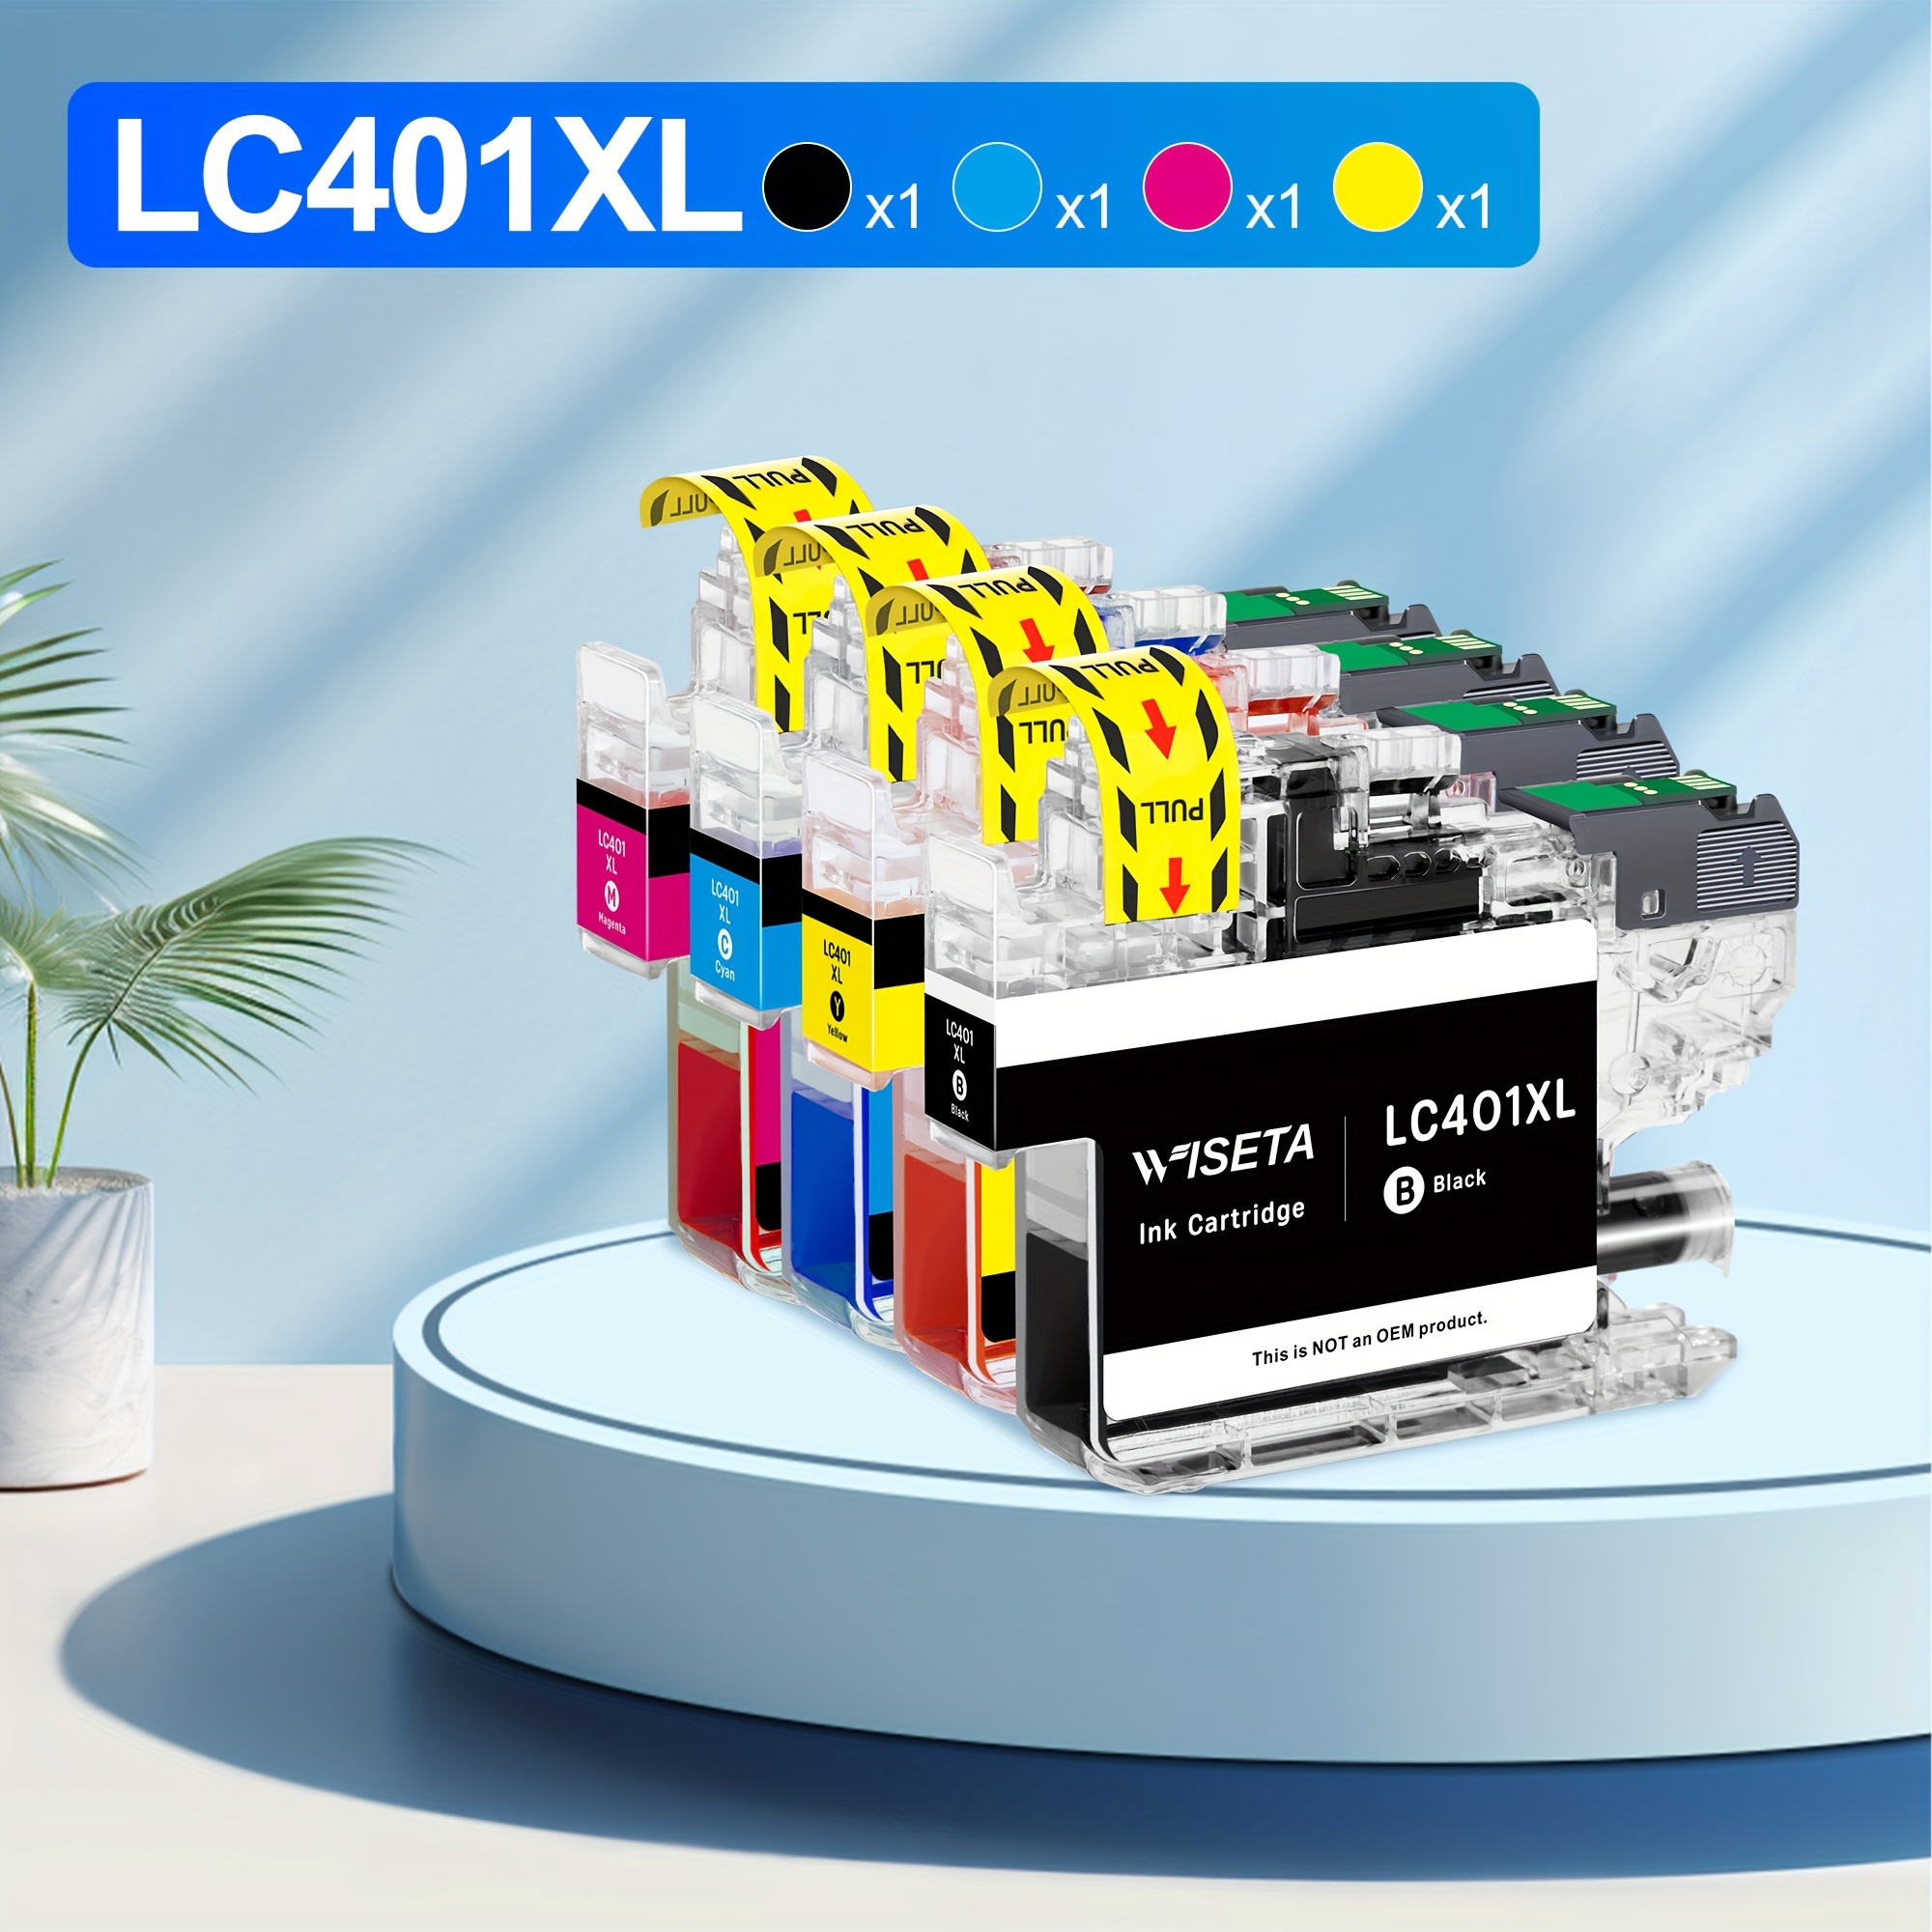 

4 Pack Lc401 Ink Cartridges Compatible Replacement For Brother Lc 401 Lc-401 Lc401xl High Yield Use To Brother Mfc-j1010dw Mfc-j1012dw Mfc-j1170dw Printer (black, Cyan, Magenta, Yellow)